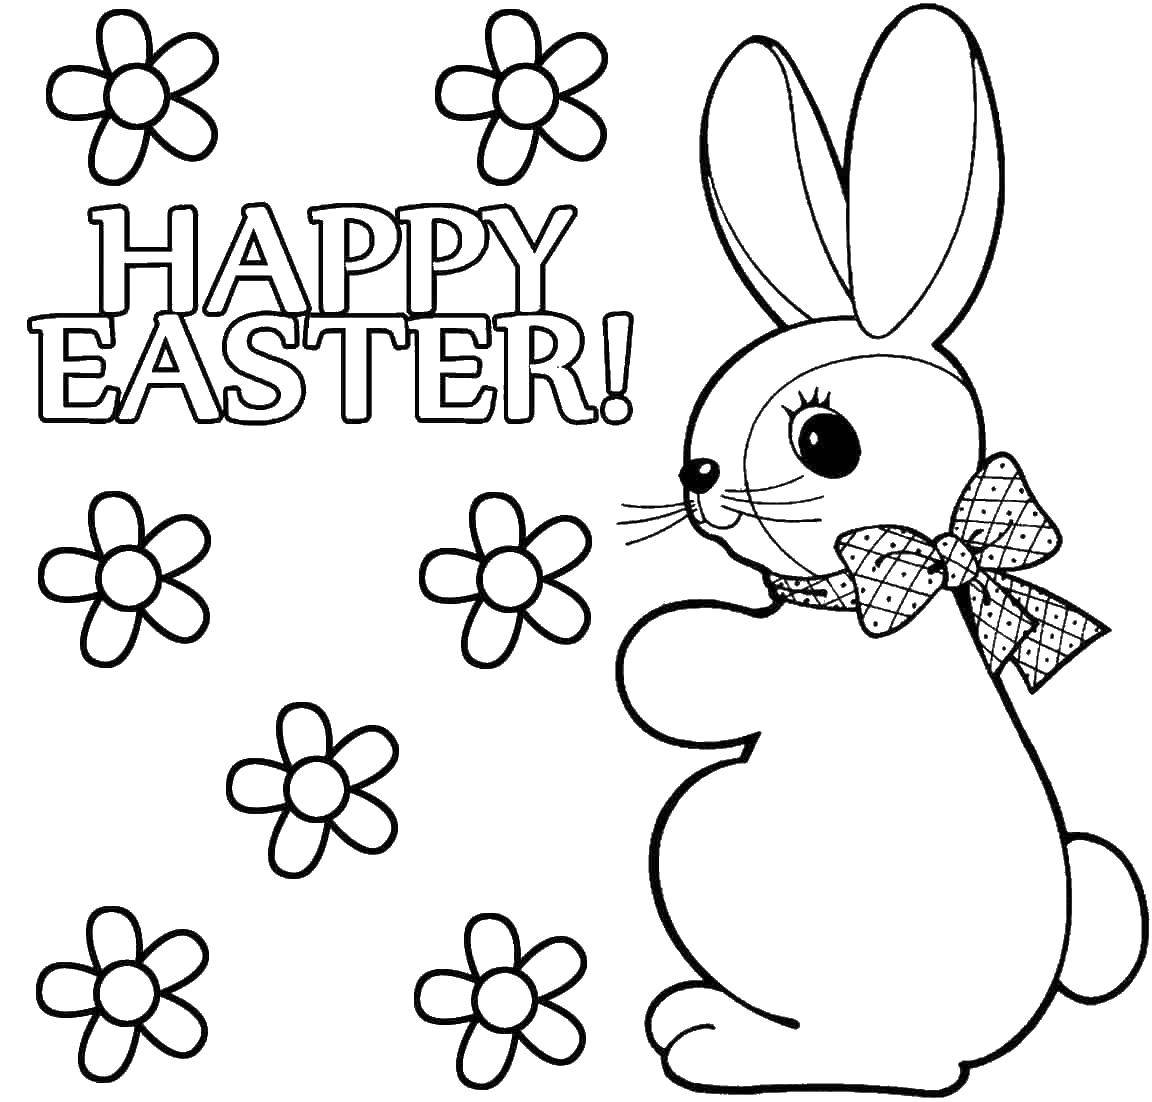 Coloring Rabbit with a bow and flowers. Category the rabbit. Tags:  flowers, rabbit, bowknot.